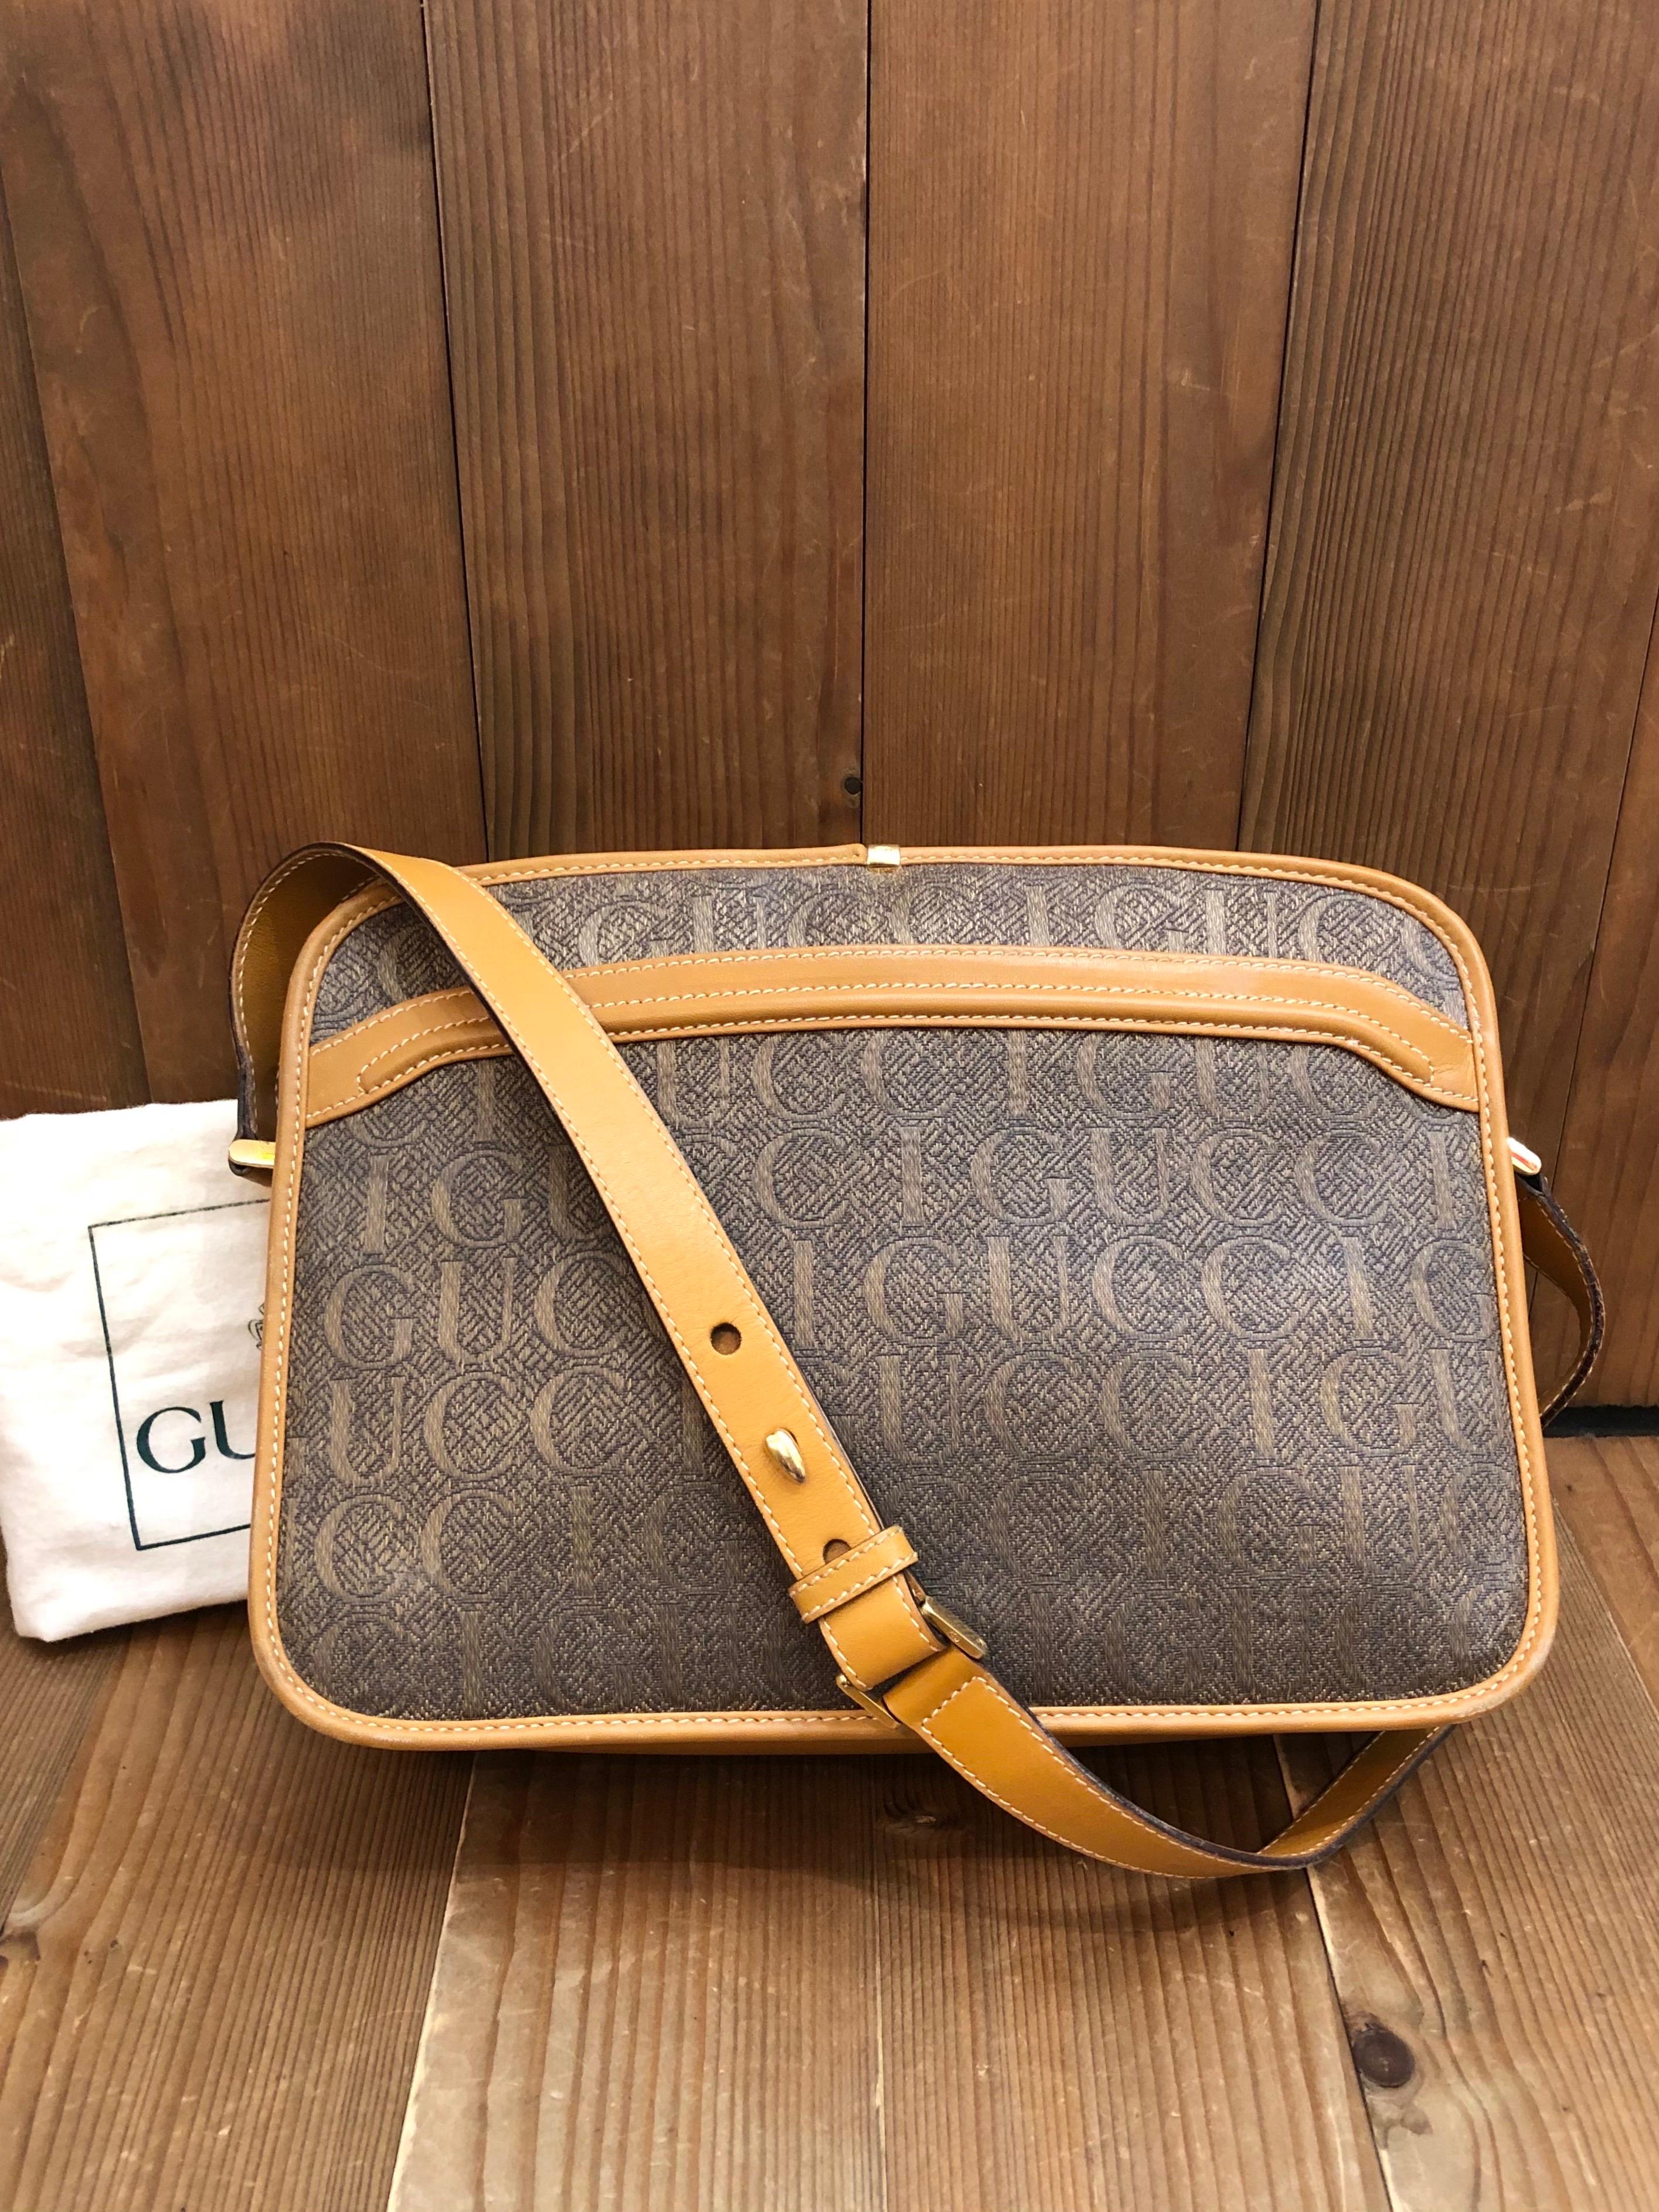 This vintage GUCCI crossbody messenger bag is crafted of brown silk jacquard embroidered with GUCCI and brown smooth leather trimmings. Top zipper closure opens to a coated interior which has been professionally cleaned featuring a zippered pocket